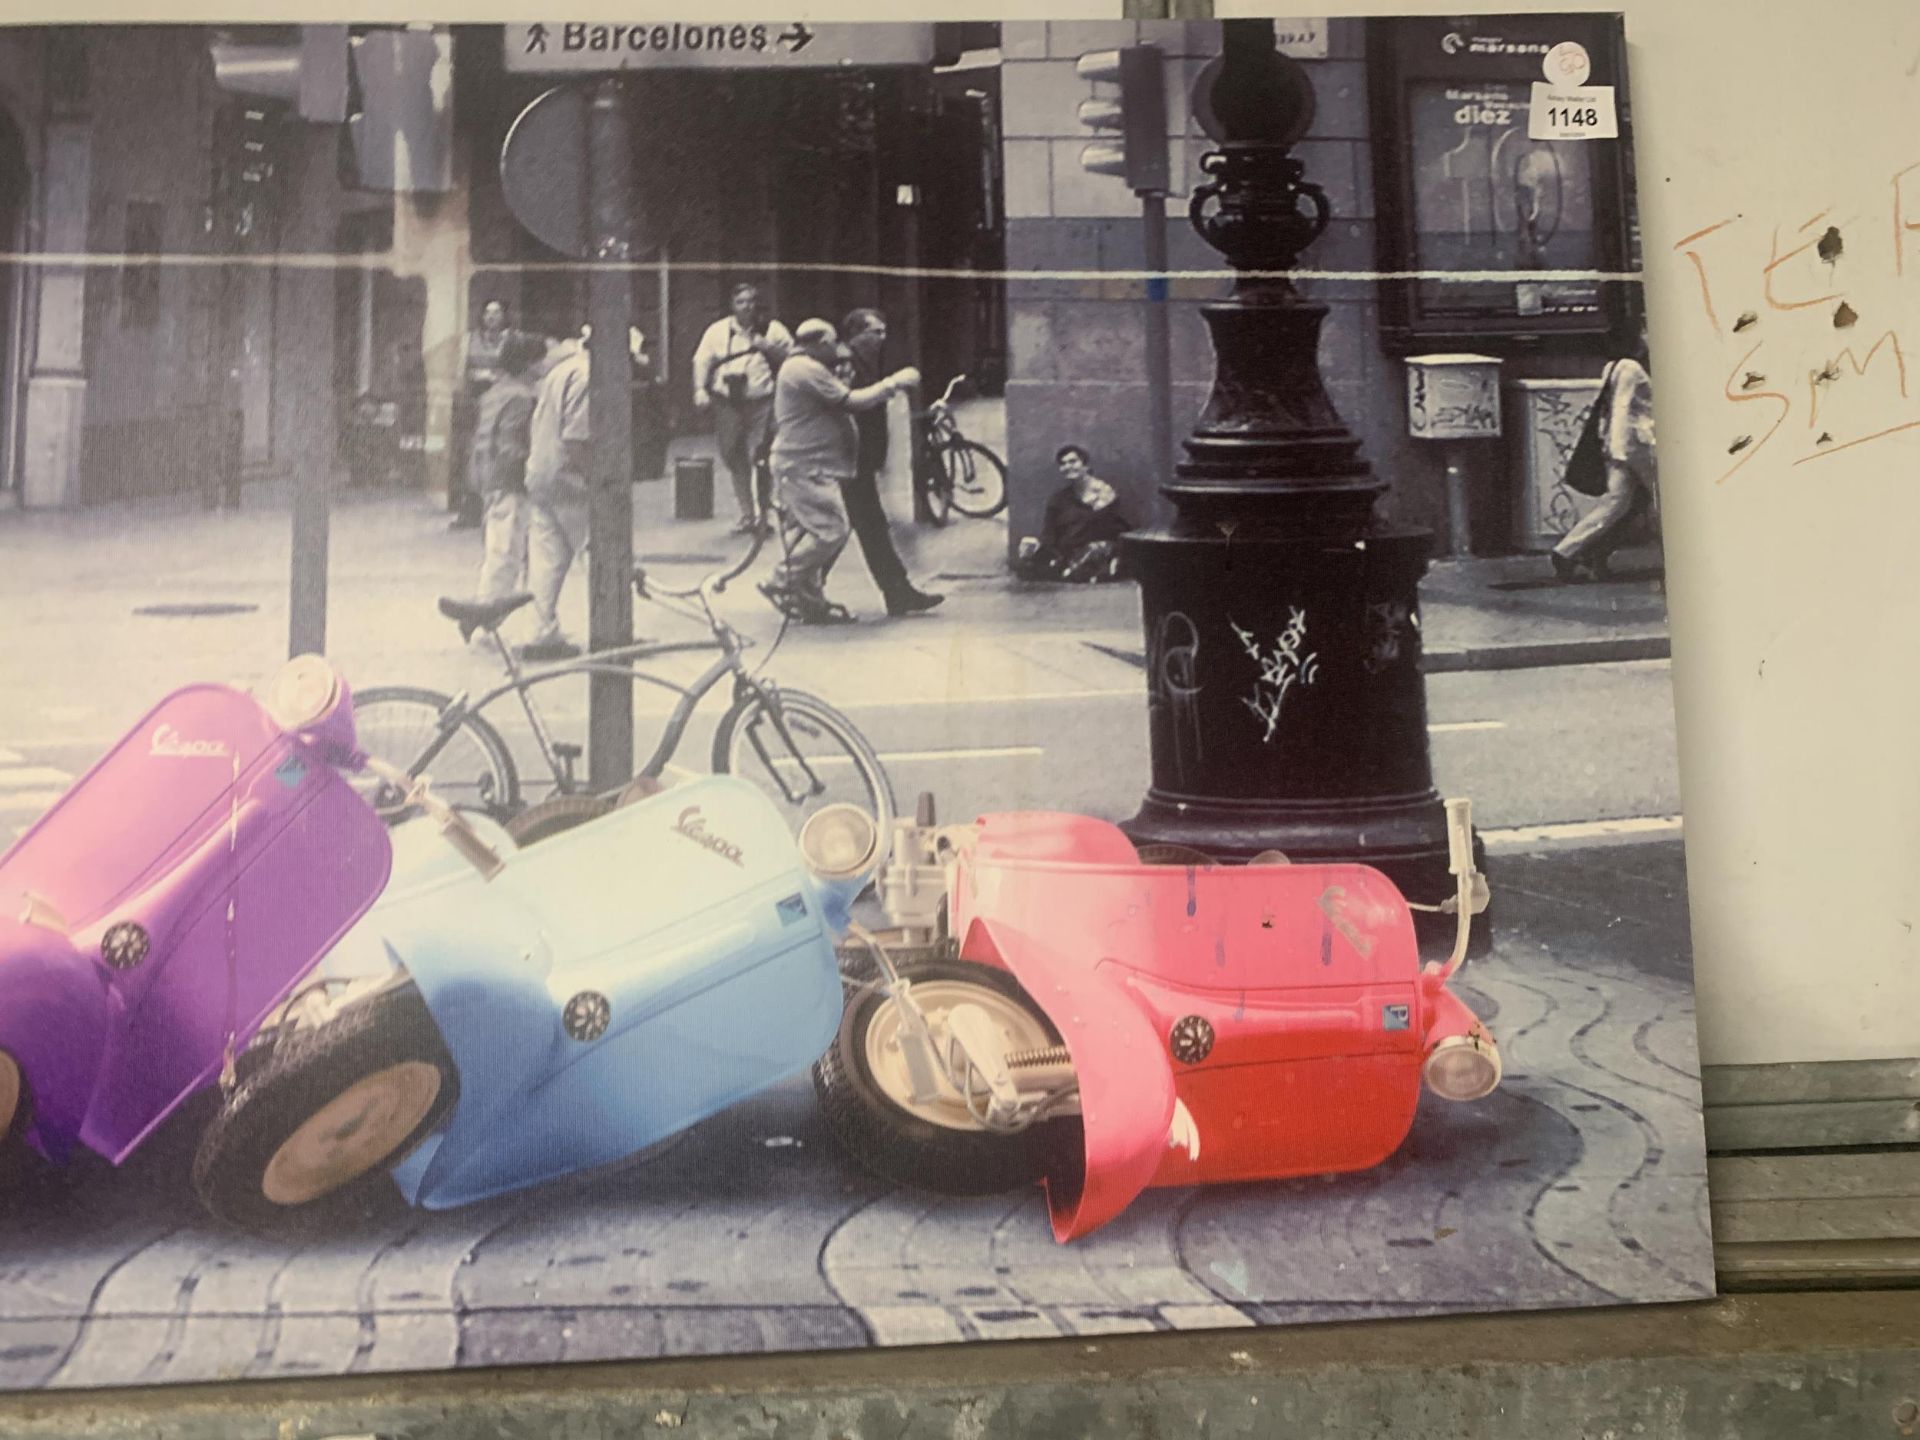 A LARGE CANVAS BOX POSTER OF SIX VESPA SCOOTERS, 48" X 20" - Image 2 of 3